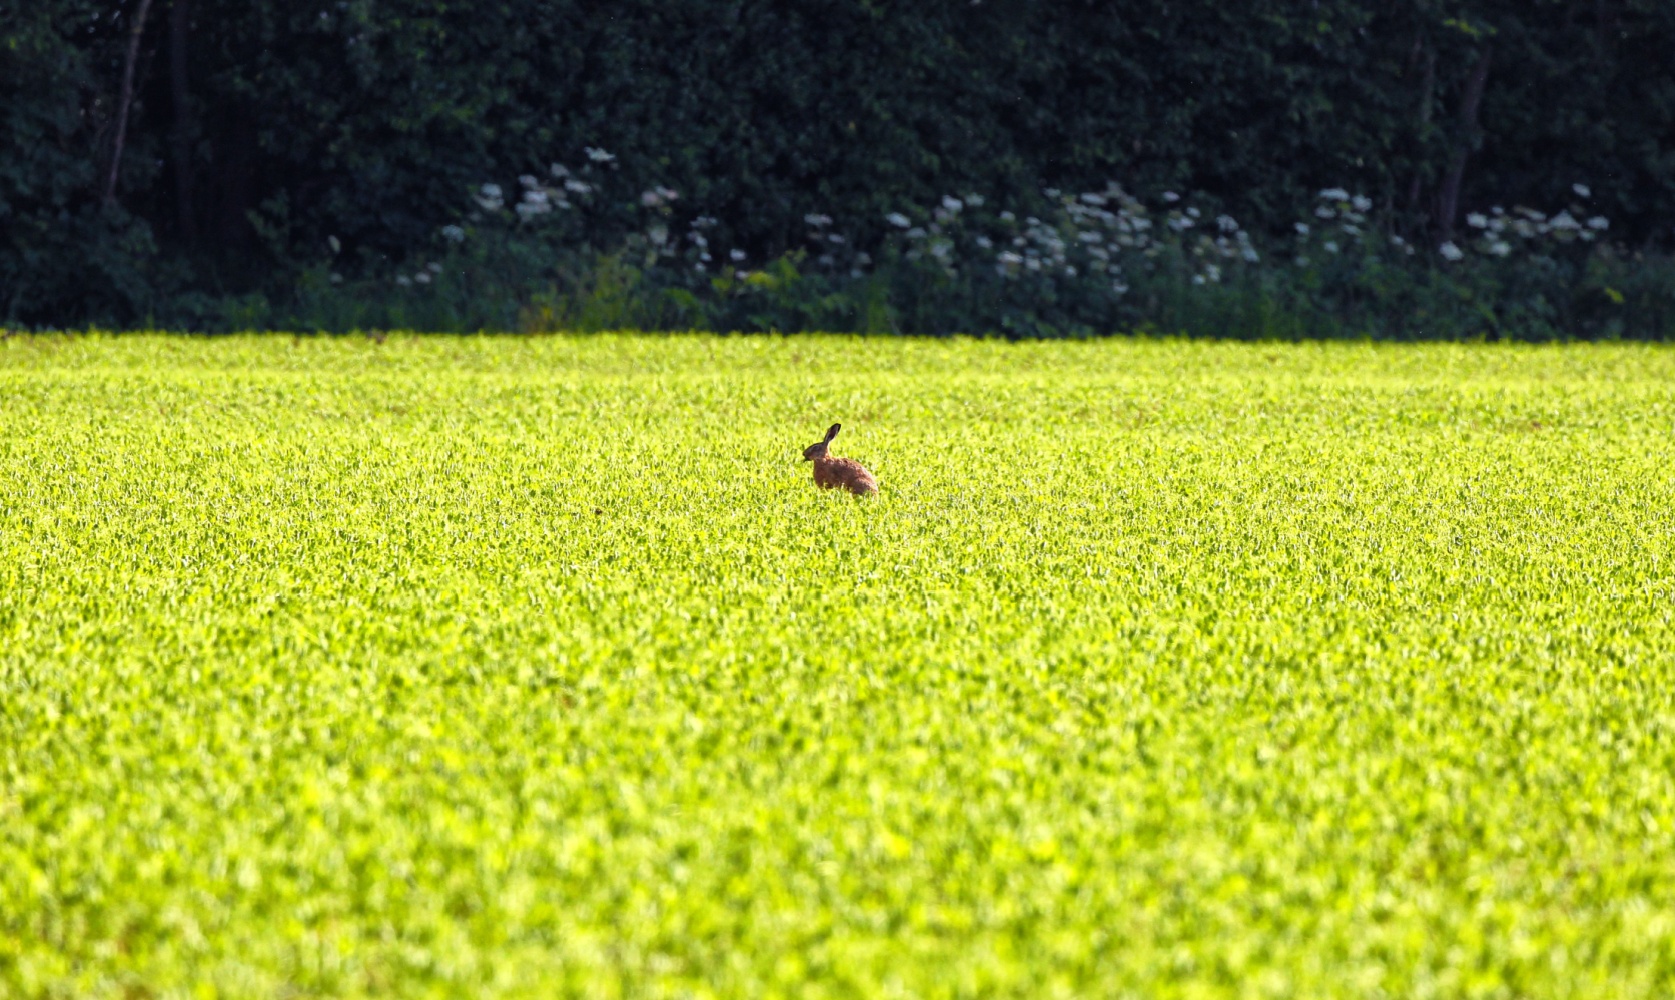 Image name hare in field scampston north yorkshire the 10 image from the post Scampston in Yorkshire.com.